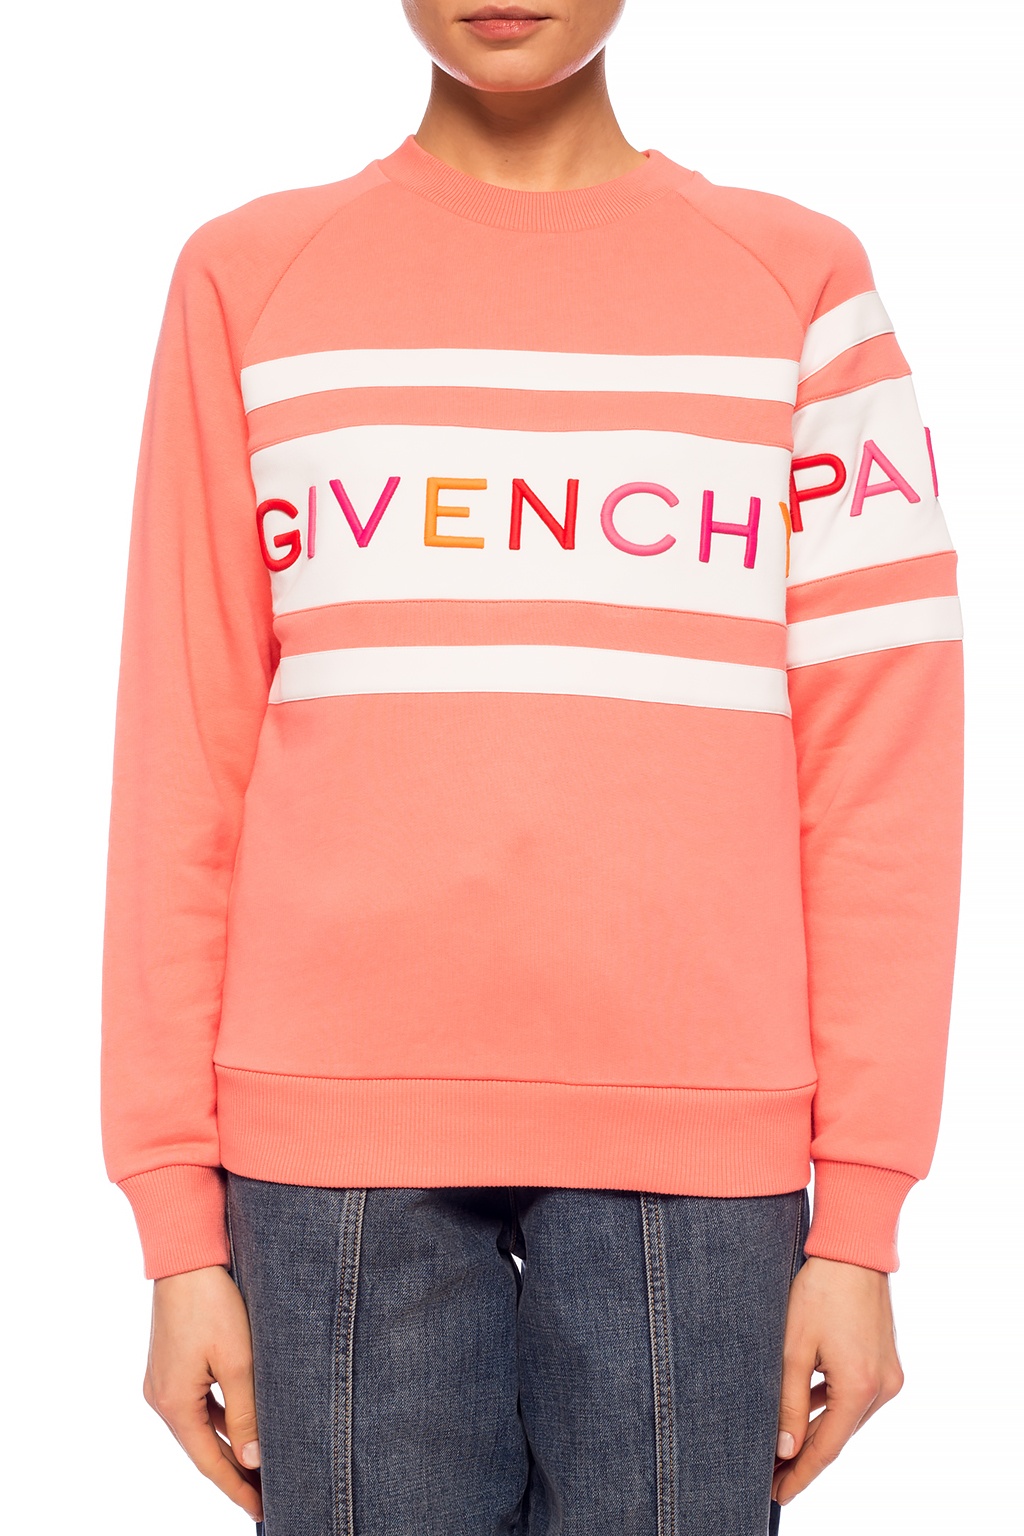 givenchy embroidered sweatshirt